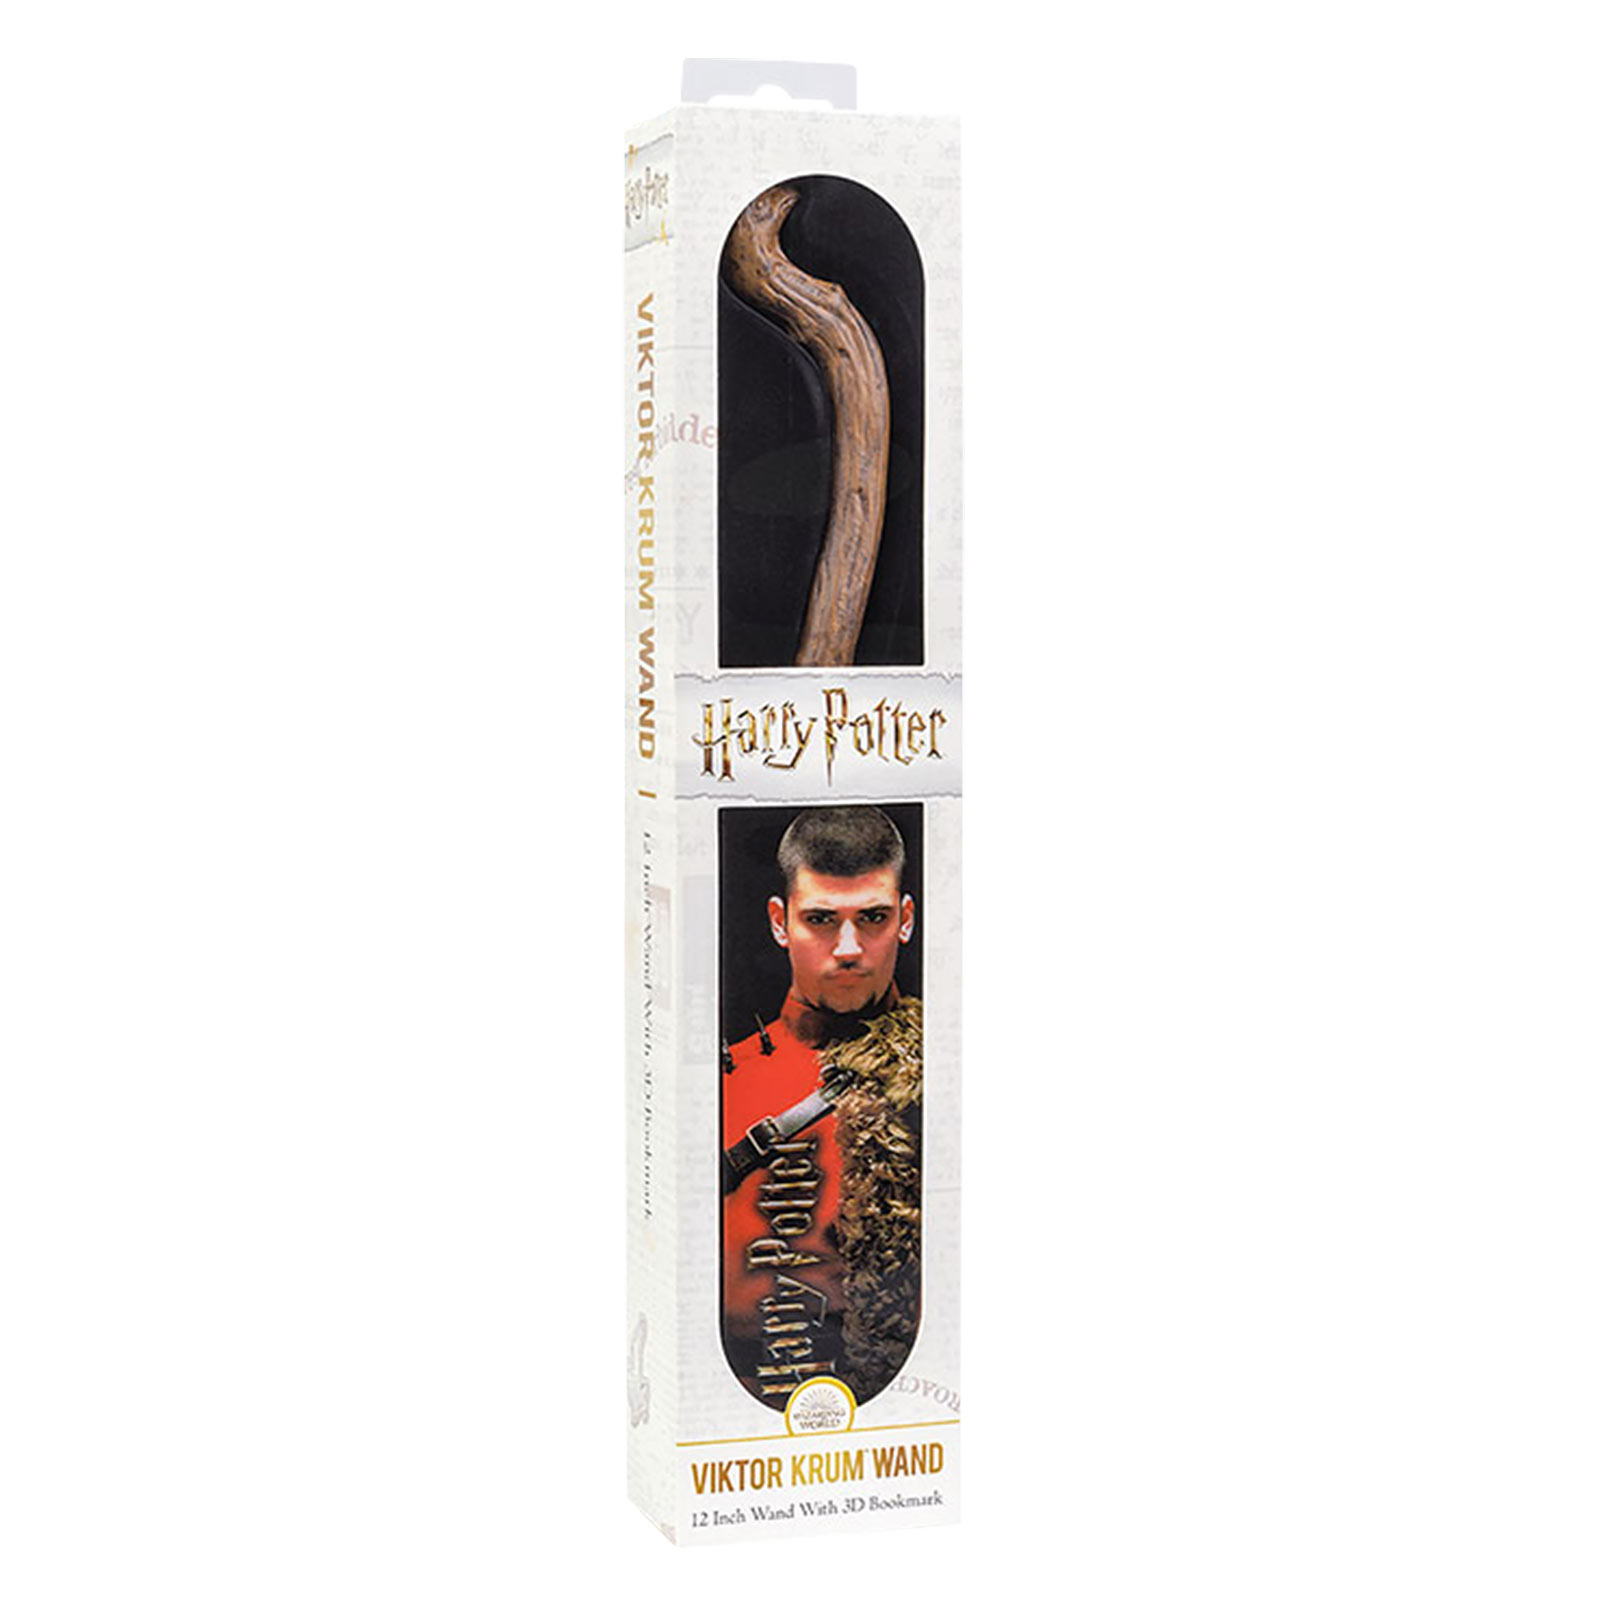 Viktor Krum Wand for Young Wizards with Bookmark - Harry Potter